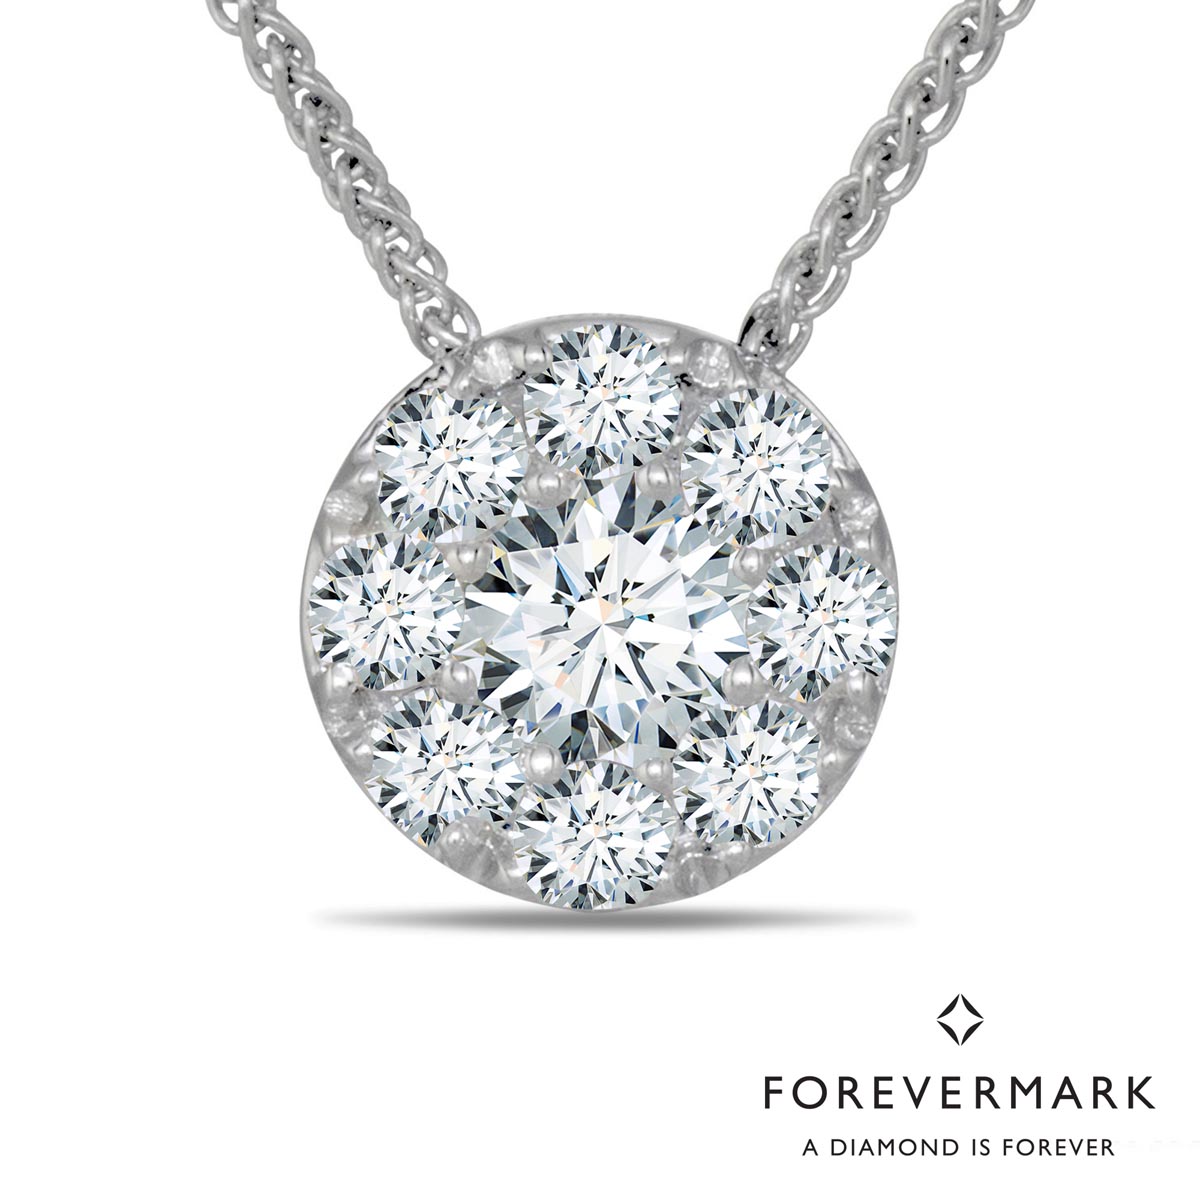 De Beers Forevermark Eternal Collection Diamond Halo Necklace in 18kt White Gold (3/8ct tw)